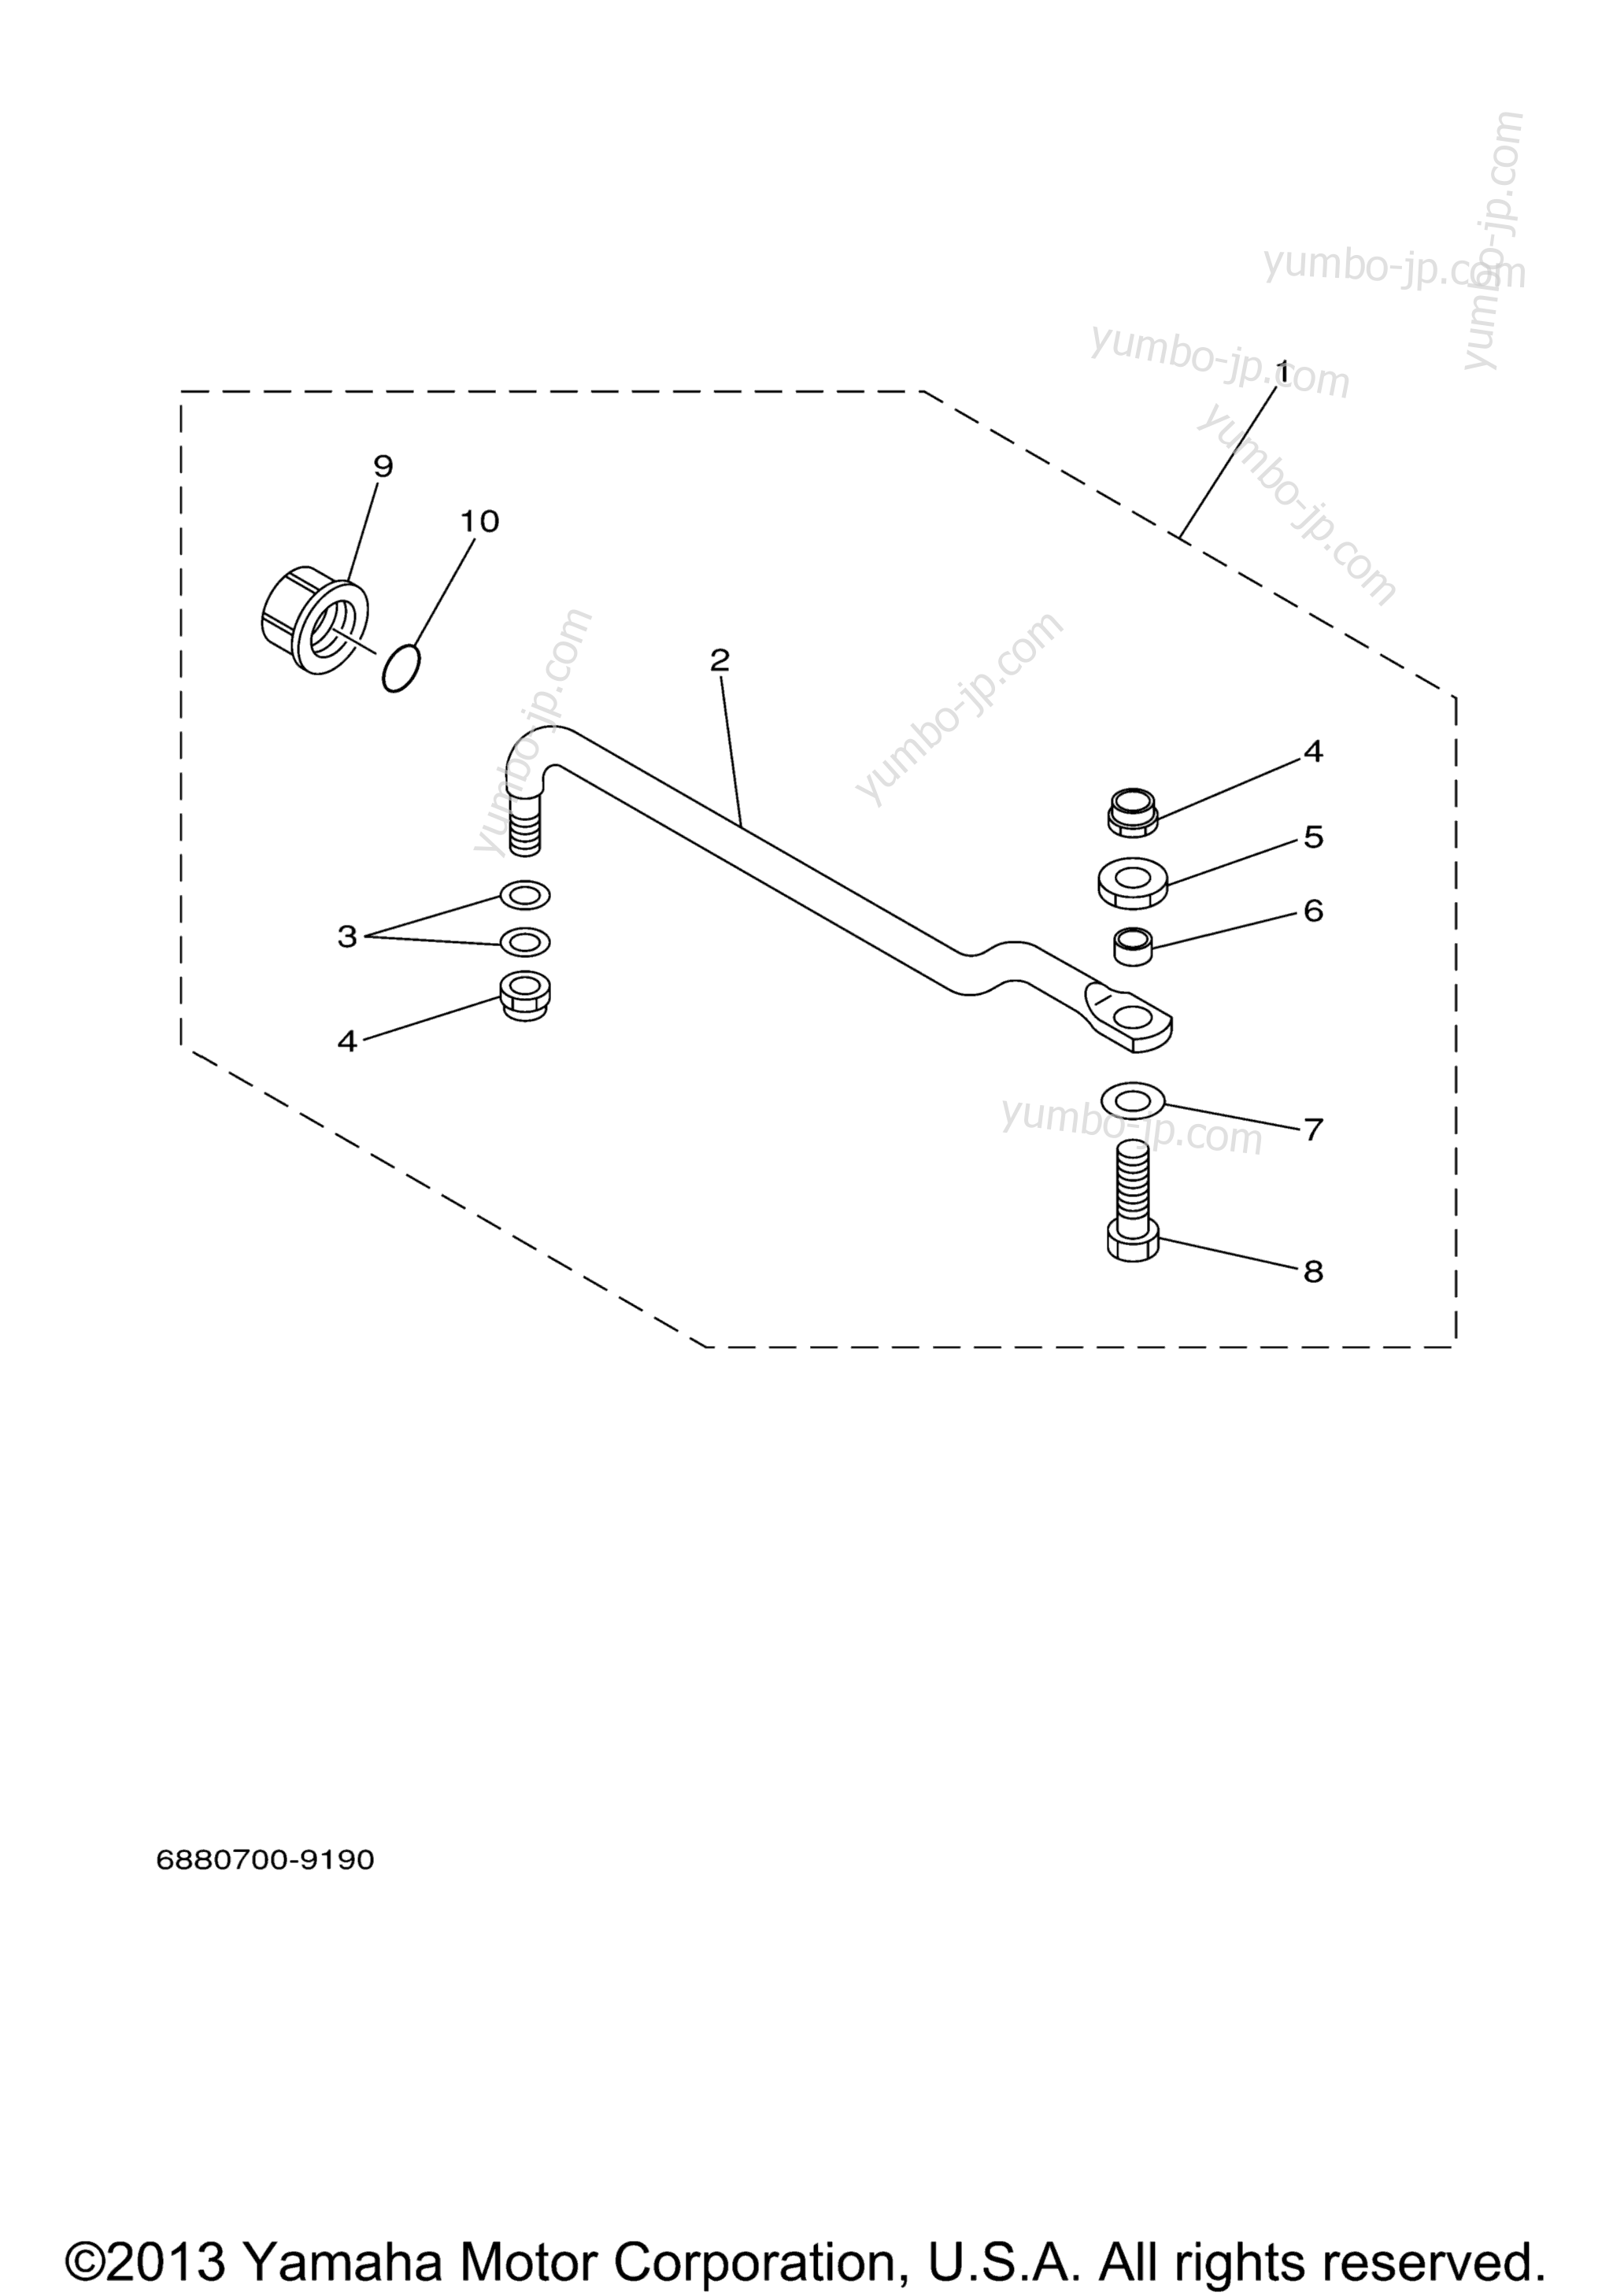 Steering Guide for outboards YAMAHA 90TLRC 2004 year